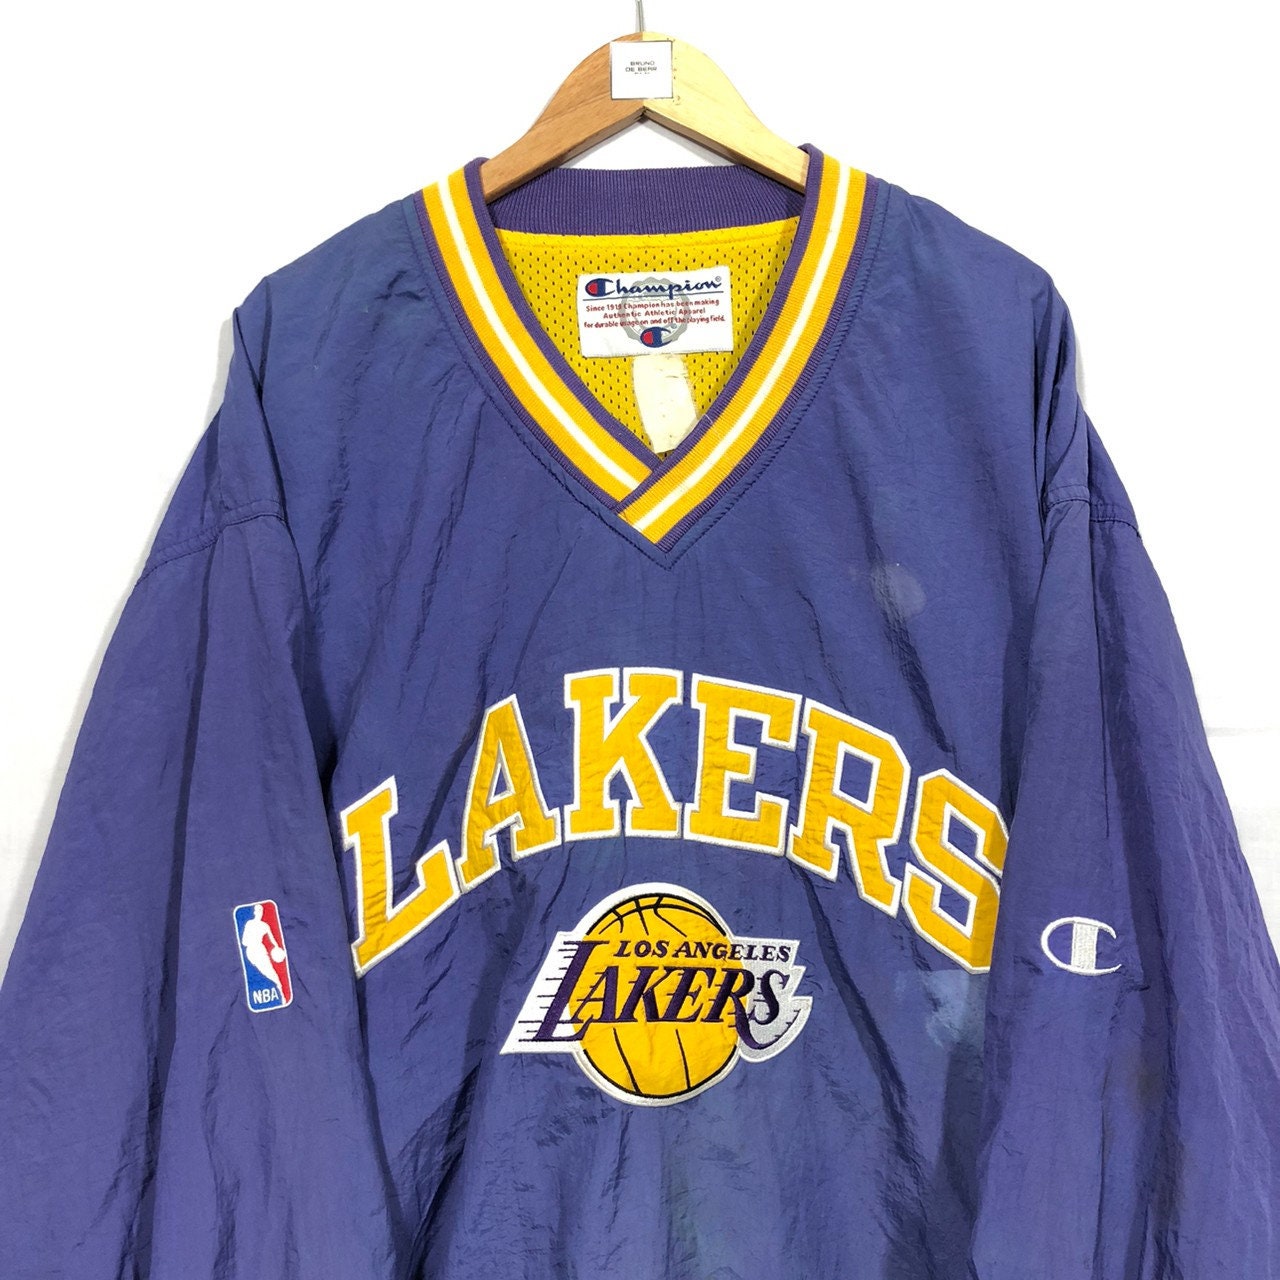 NBA Vintage Black Lightning Lakers Hoodie S / BMPHJT20002 by Mitchell & Ness